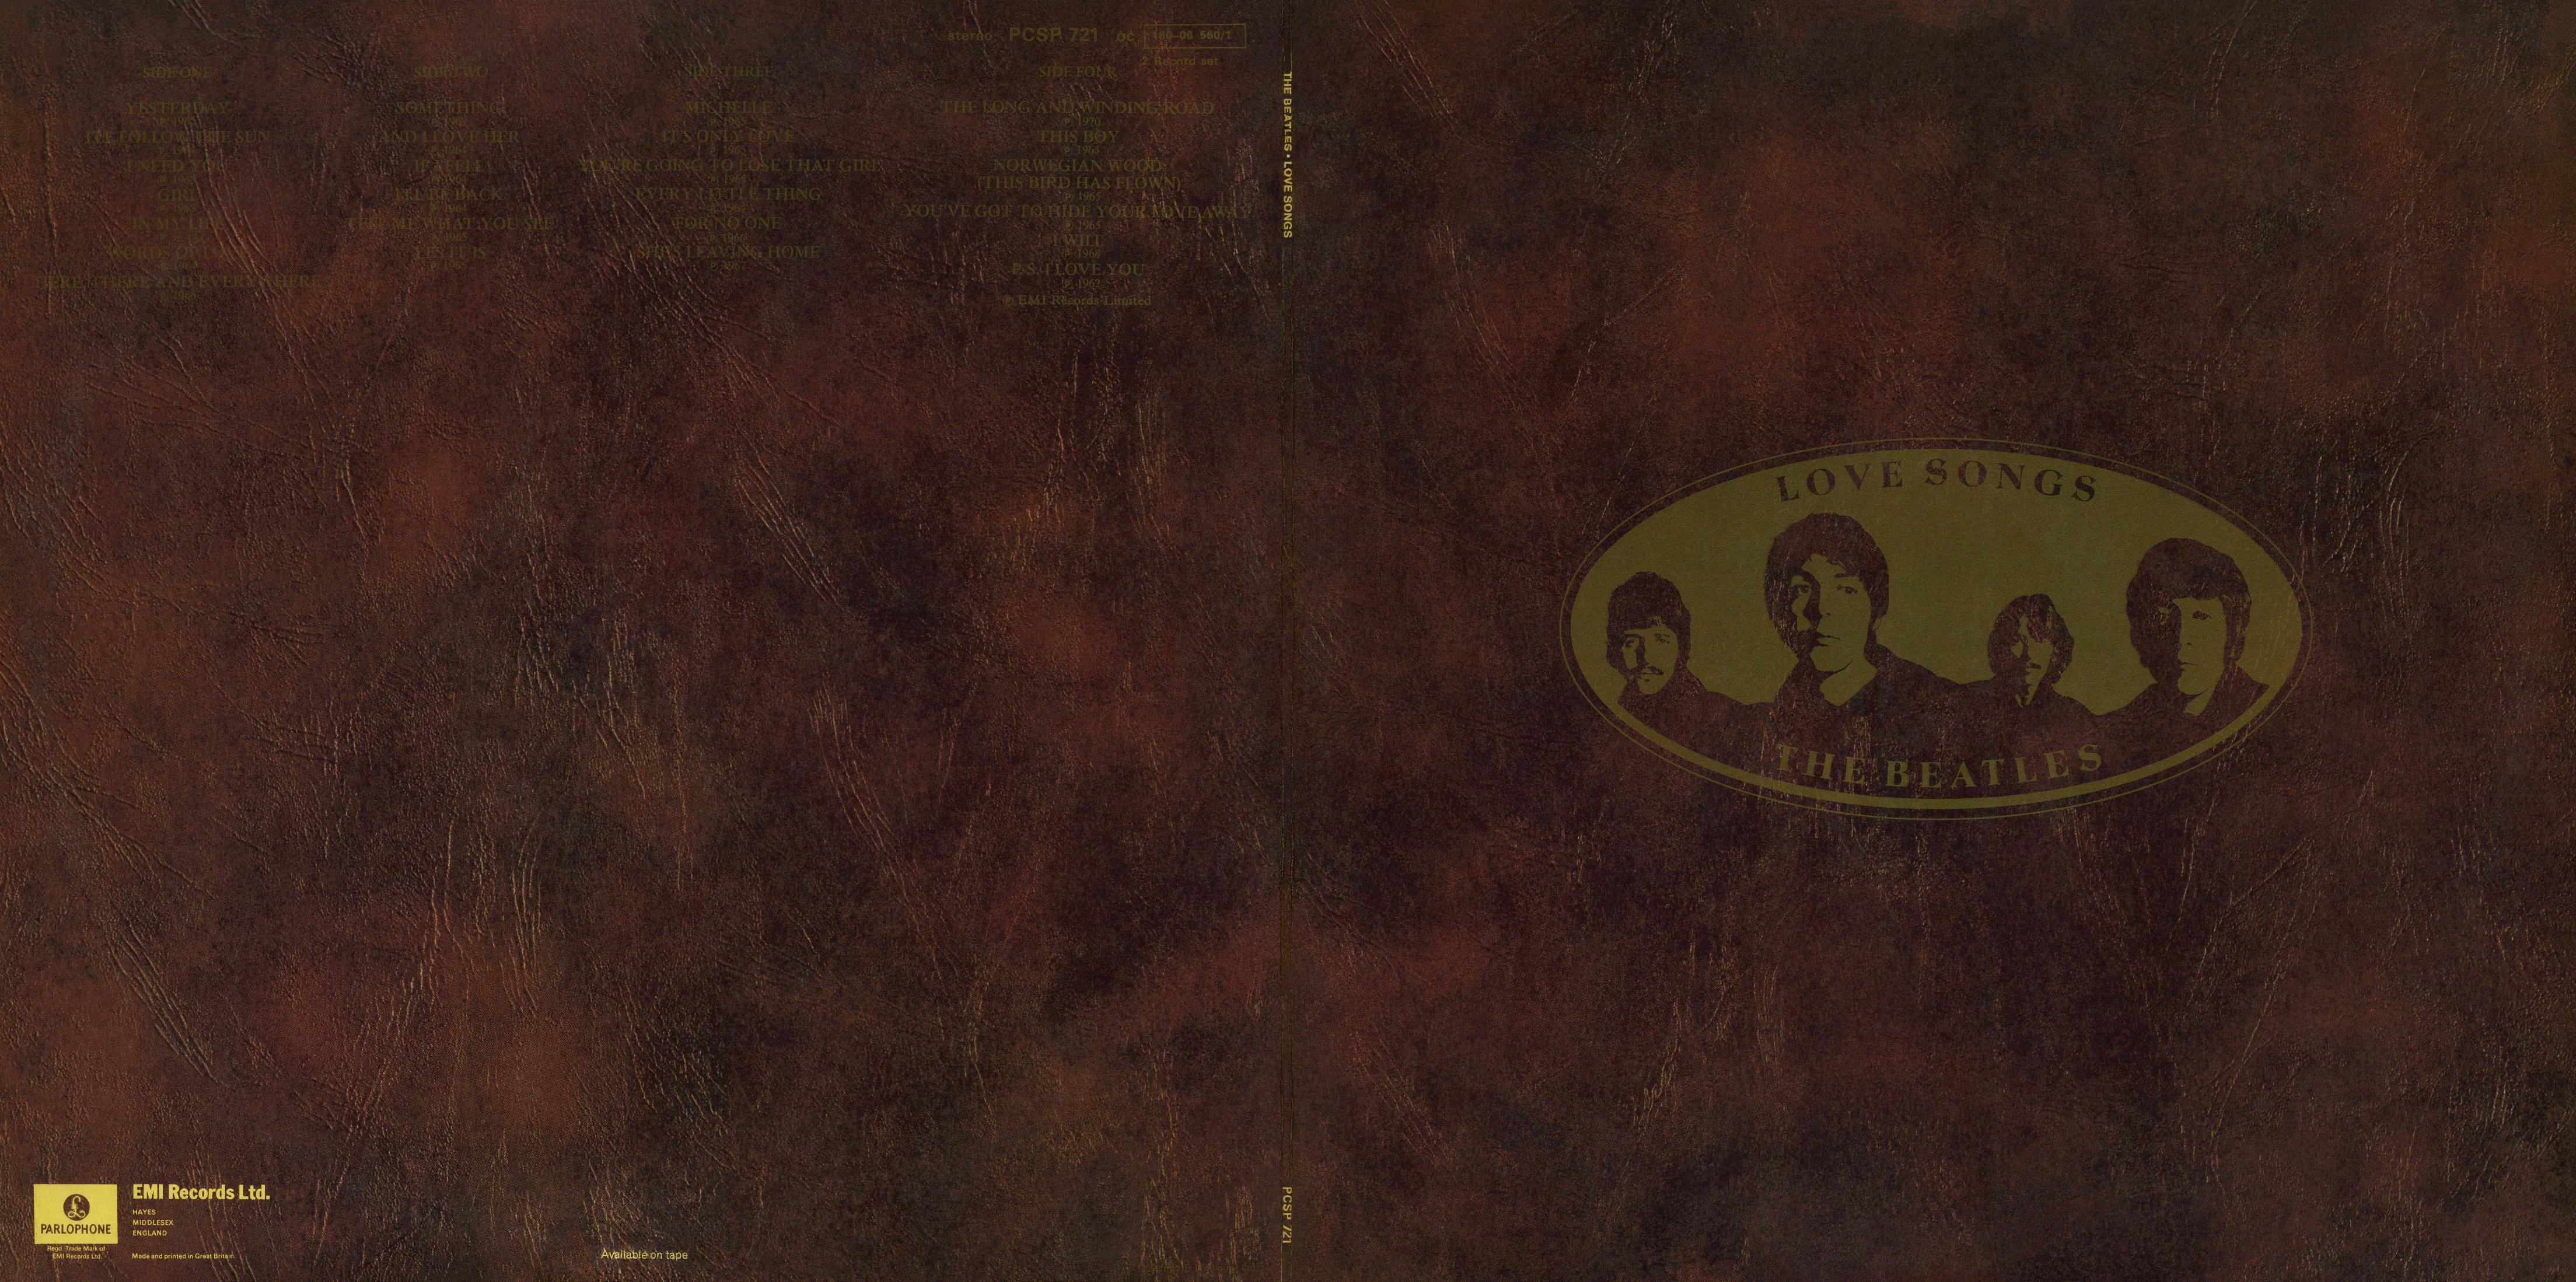 The Beatles Collection » Love Songs, Parlophone PCSP 721.